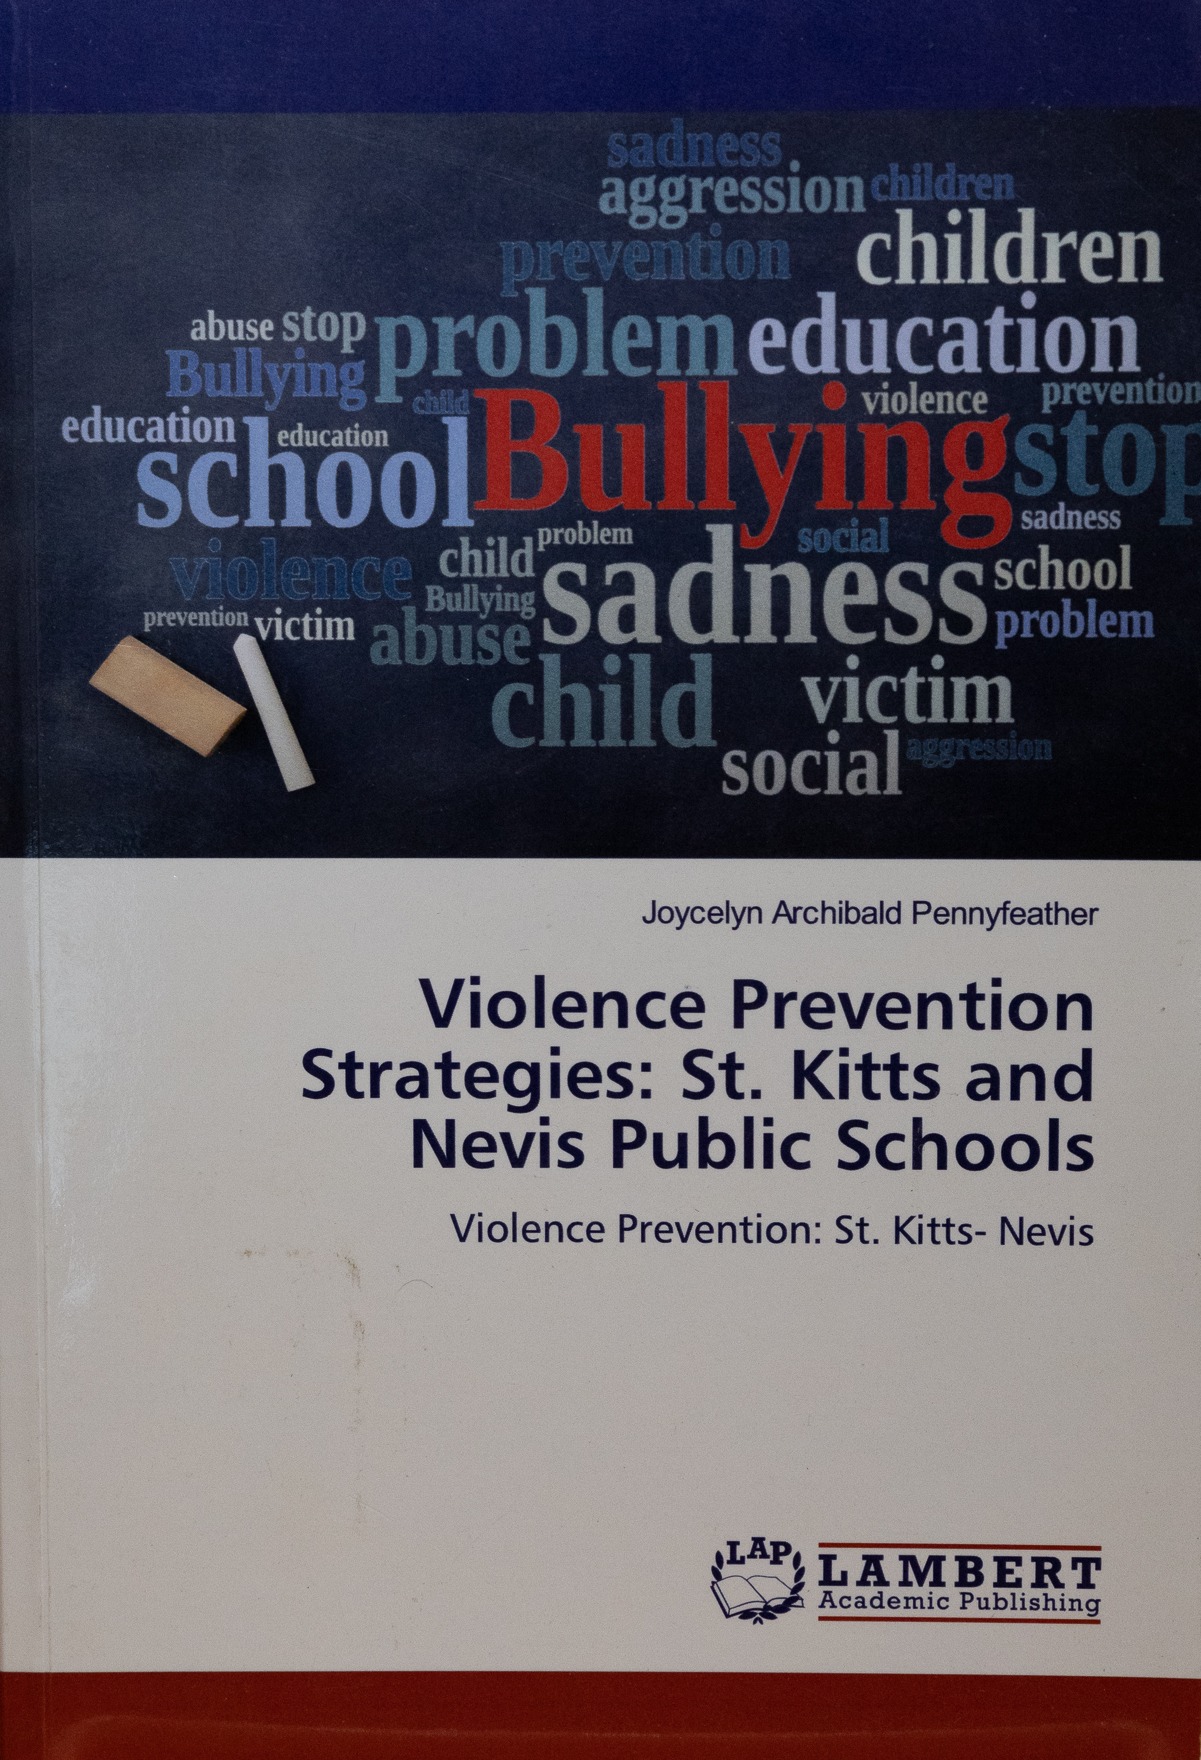 Violence Prevention Strategies: St. Kitts and Nevis Public Schools: Violence Prevention: St. Kitts-Nevis